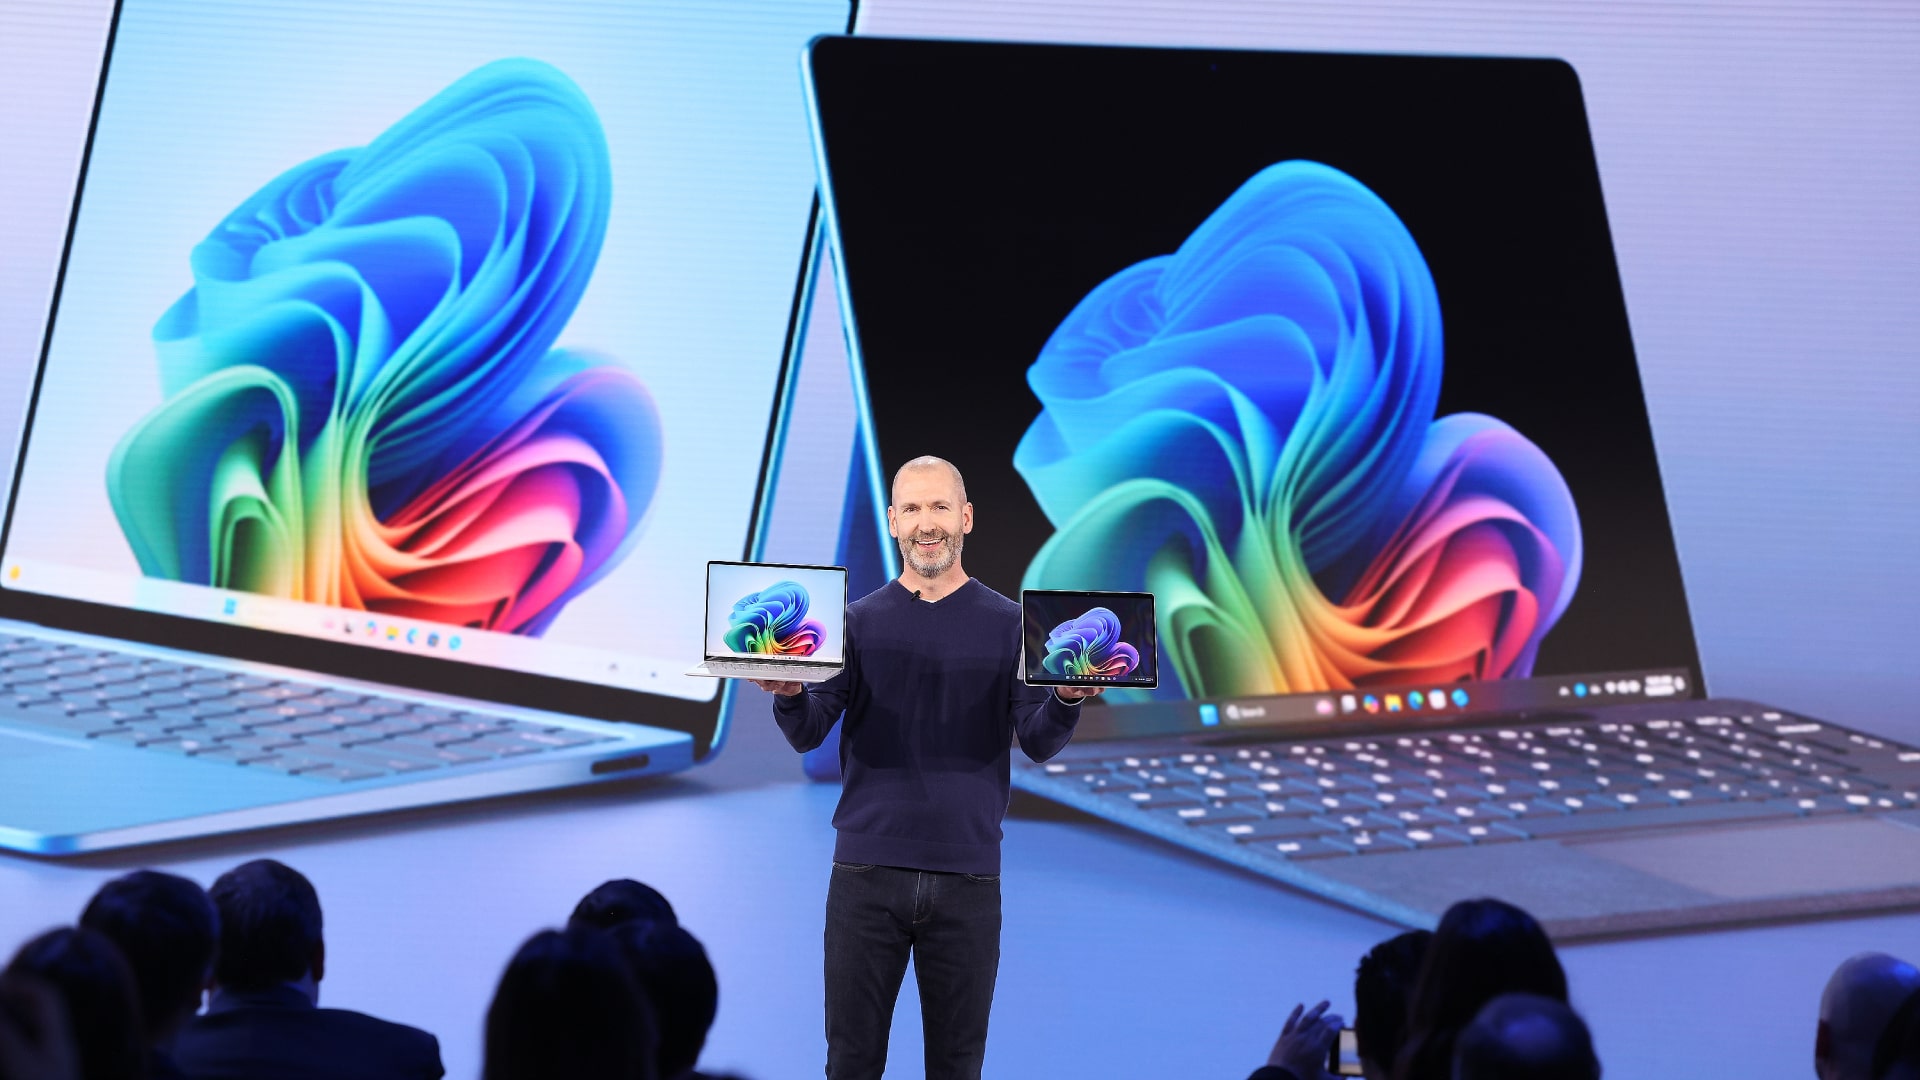 Microsoft presents Surface Laptop and Surface Pro devices.